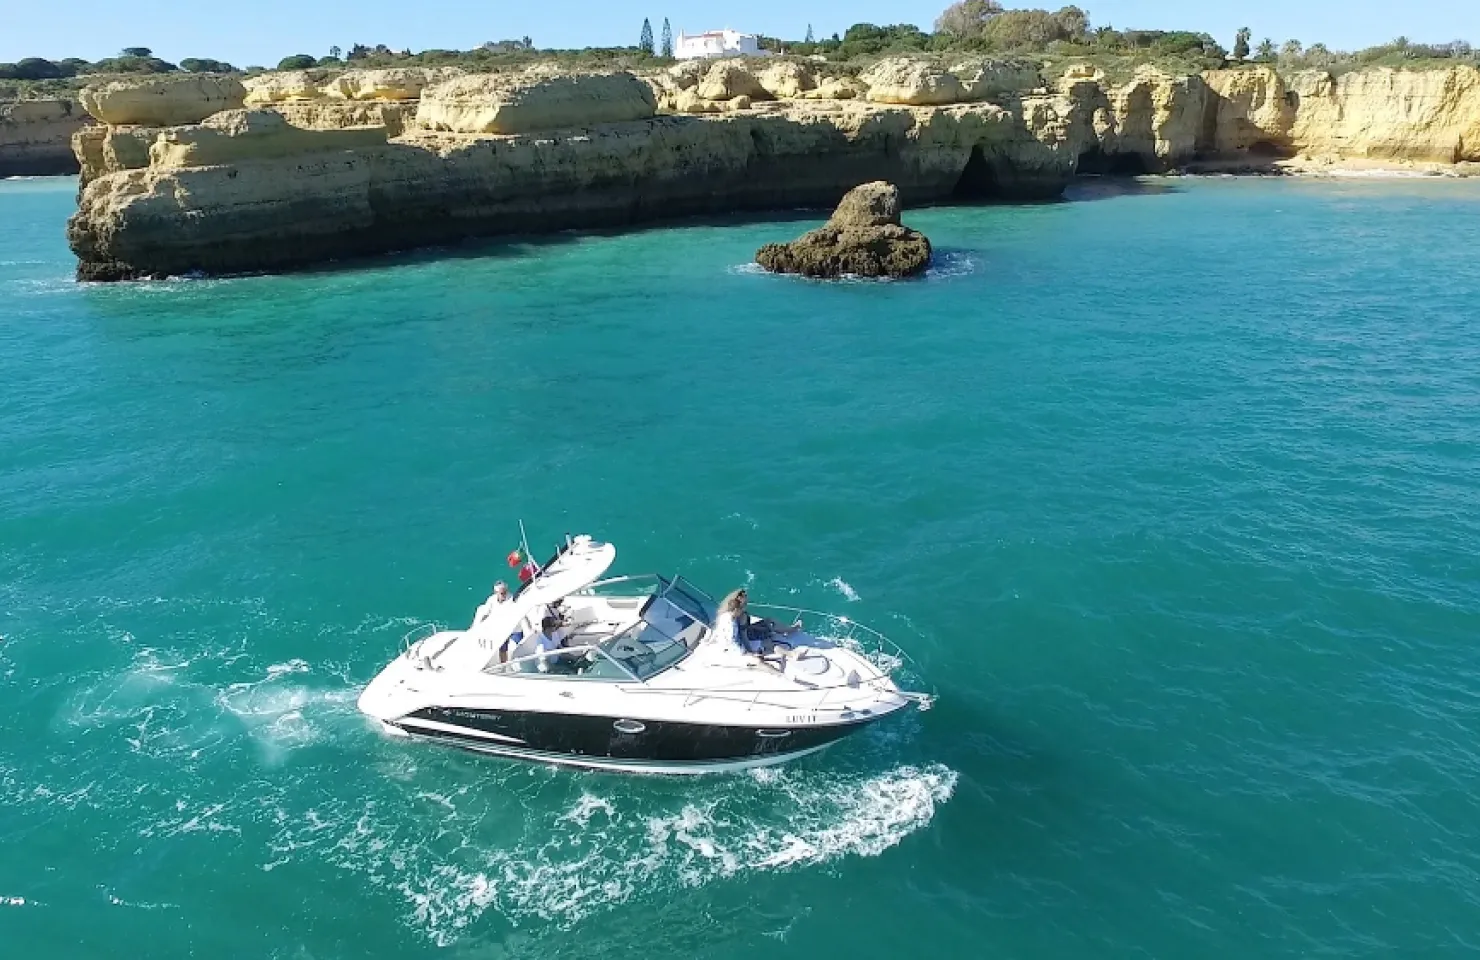 Luvit Yacht Charters - Algarve Boat Trips and tours